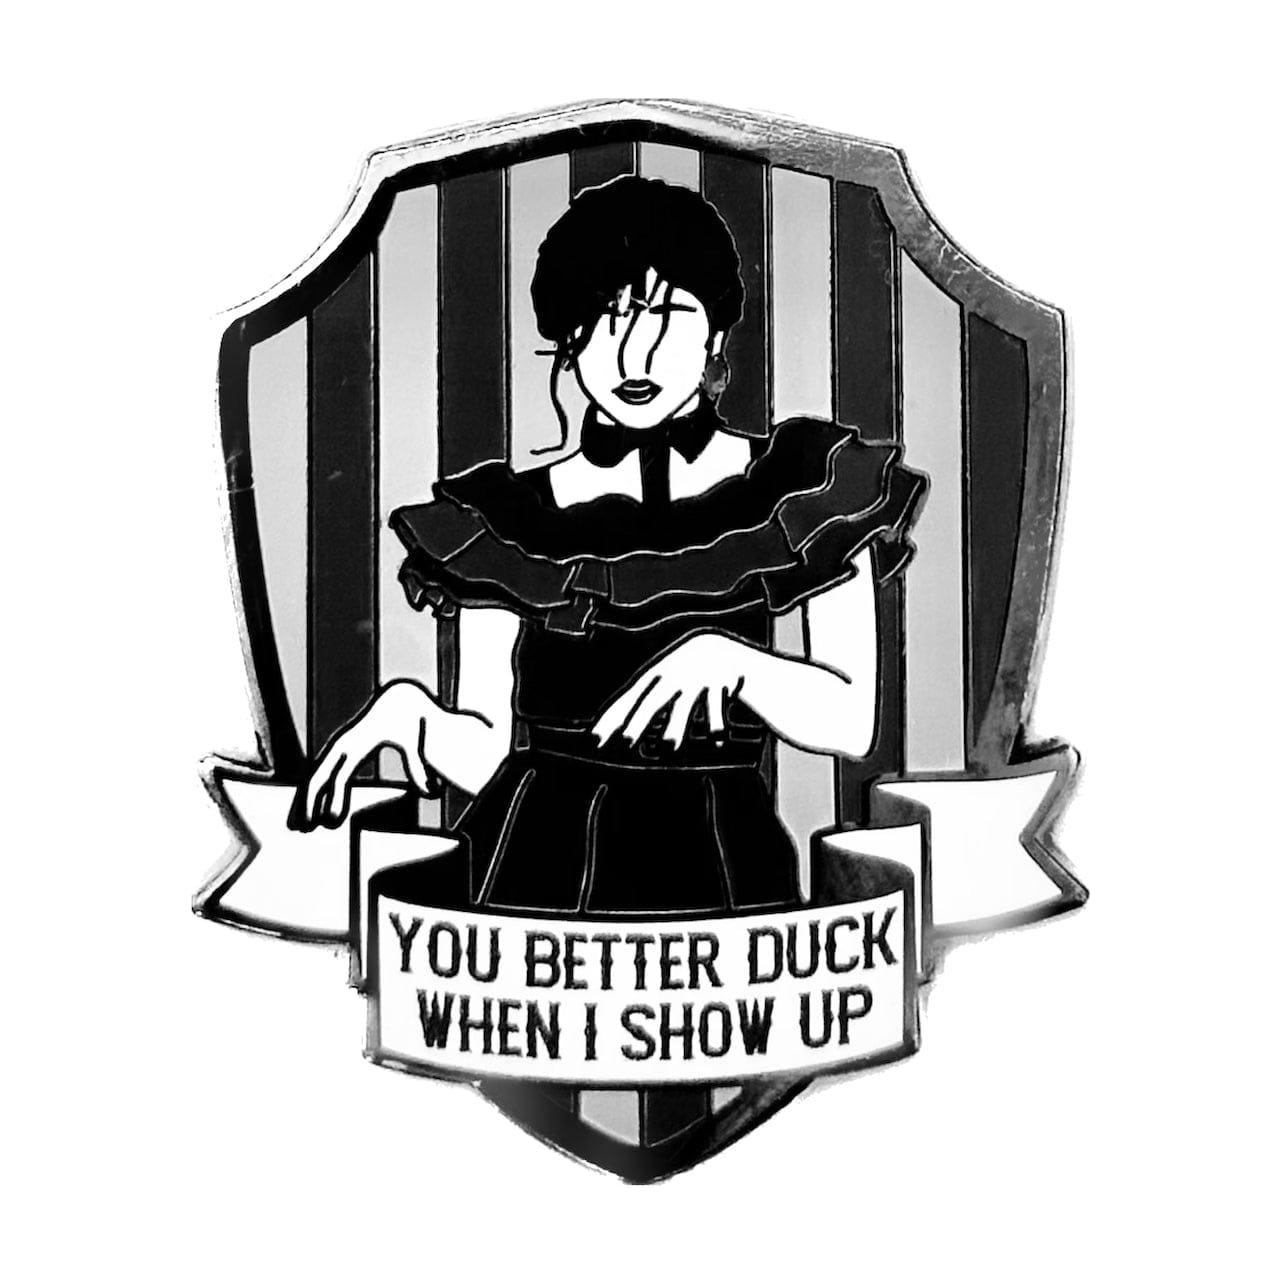 Pinbuds Enamel pin Wednesday dance pin featuring lyric "You better duck when i show up"